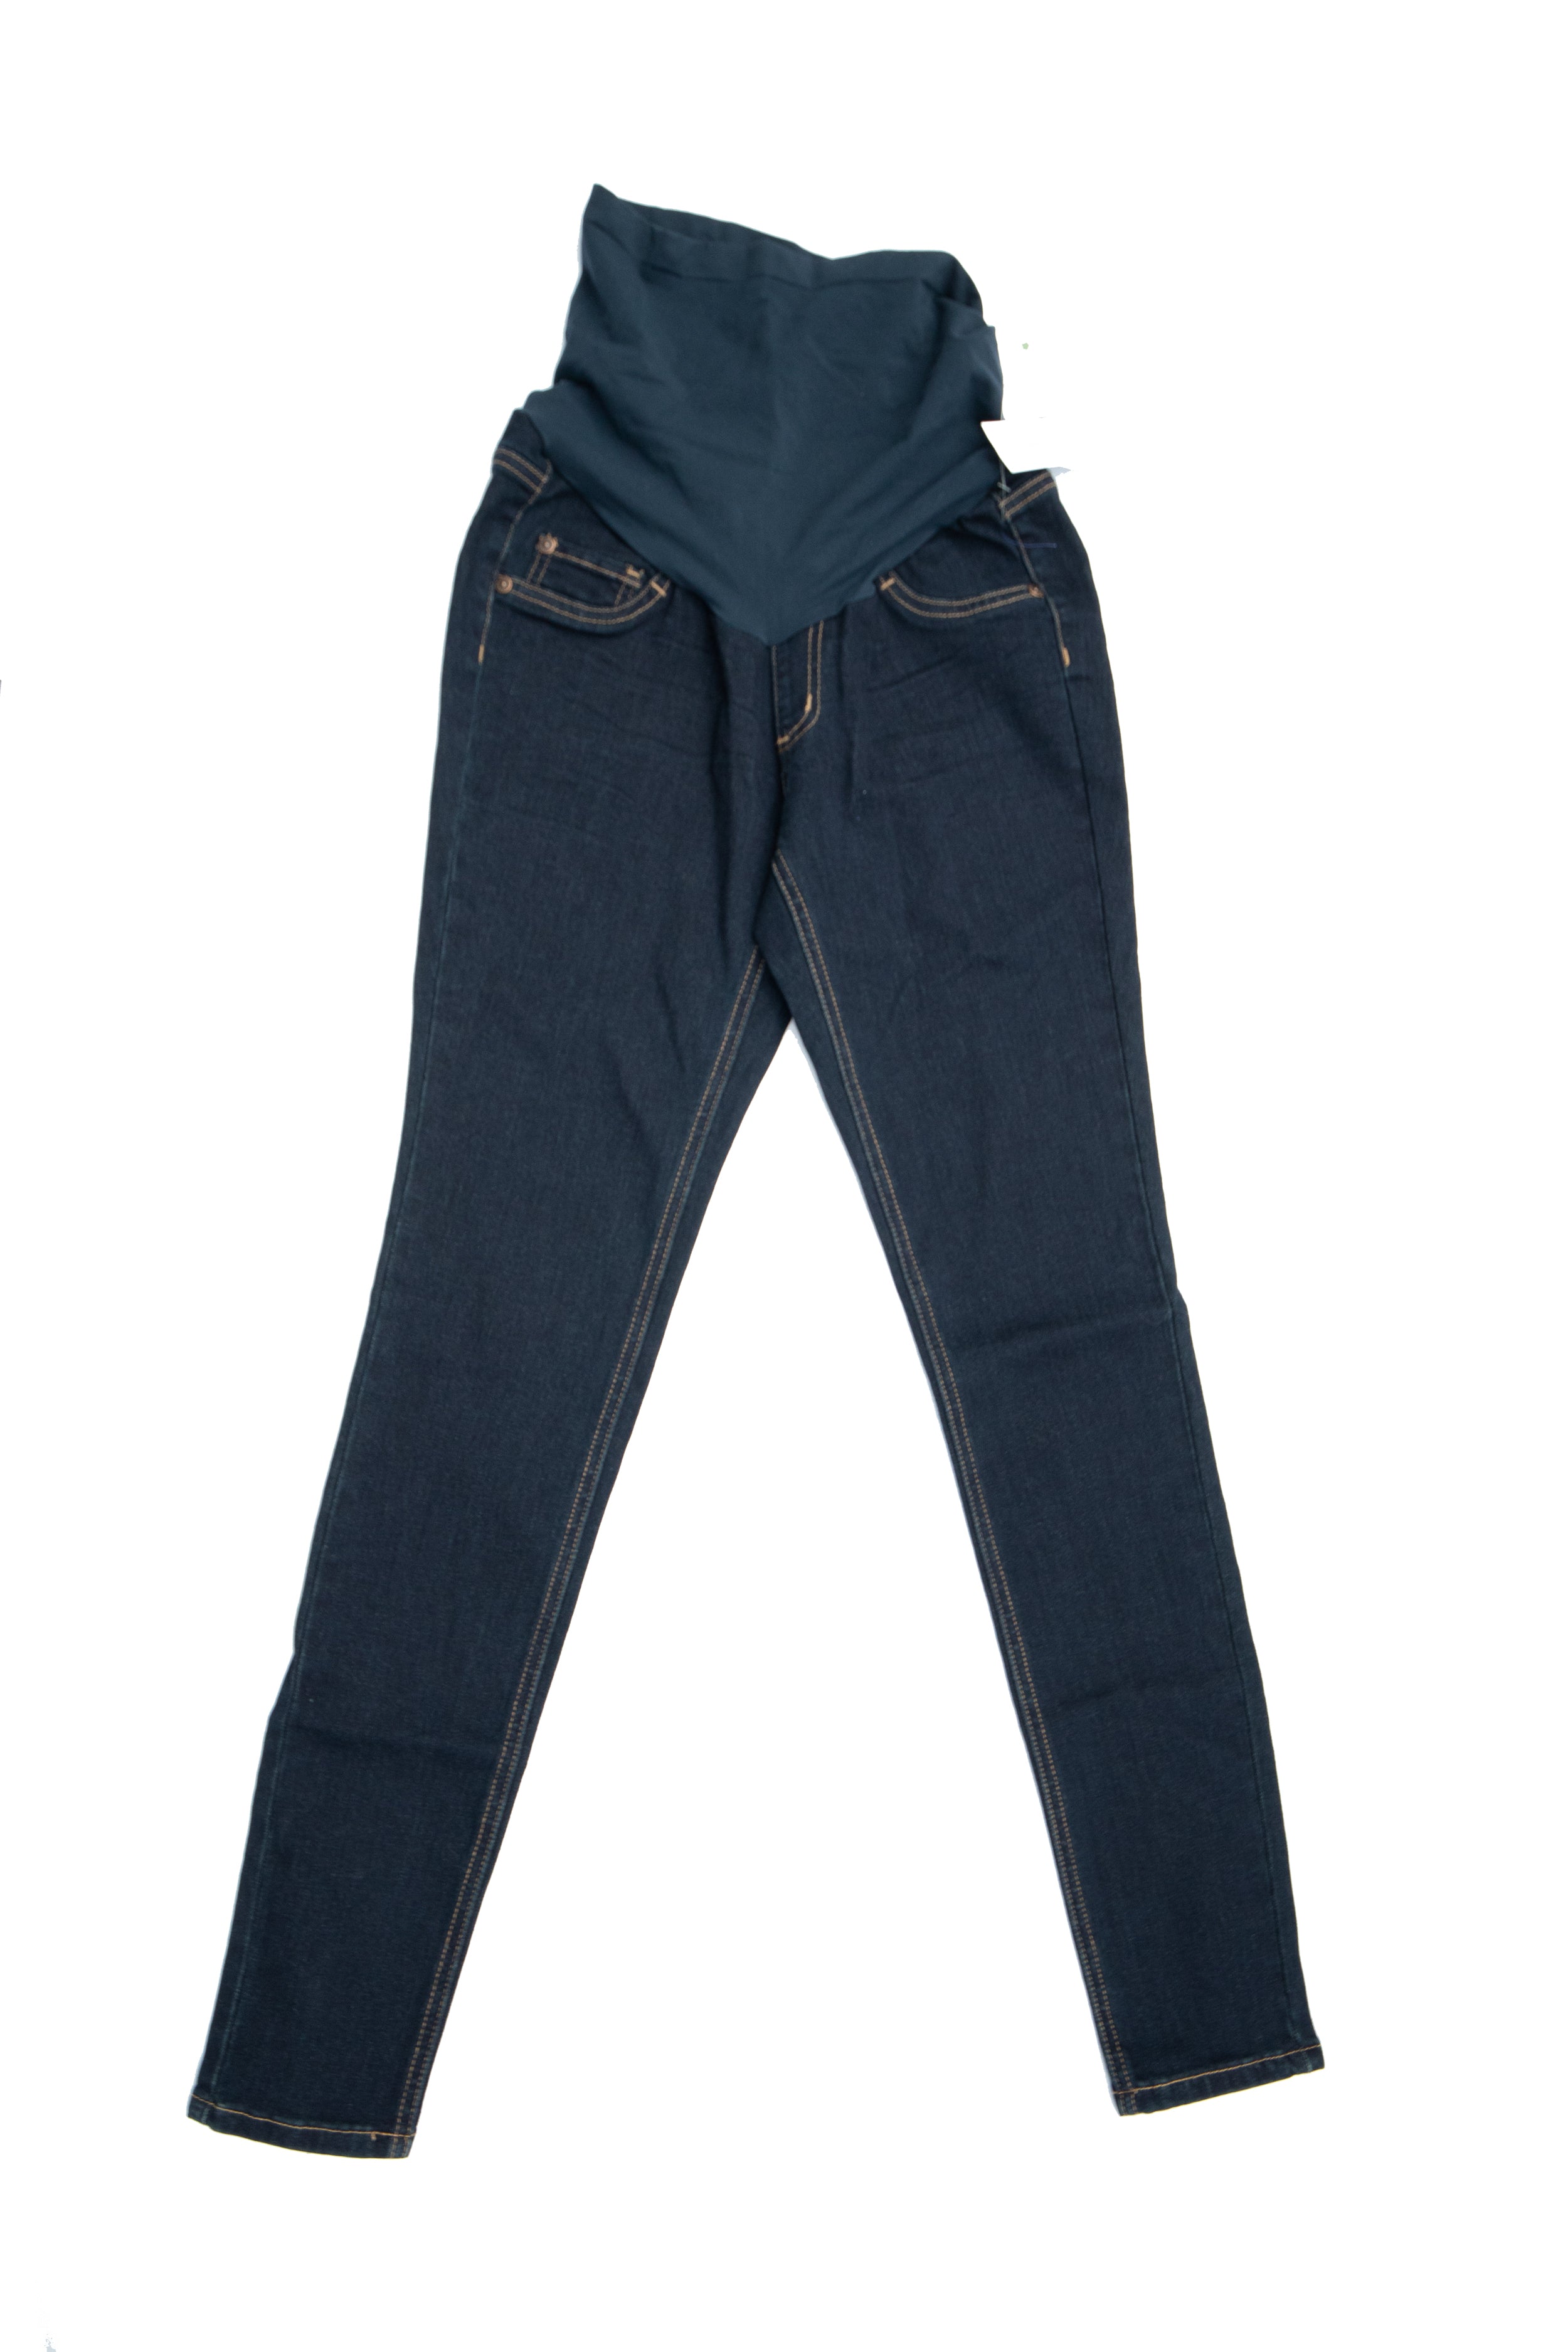 CLEARANCE *New* S Indigo Blue Maternity Skinny Jeans – Happily